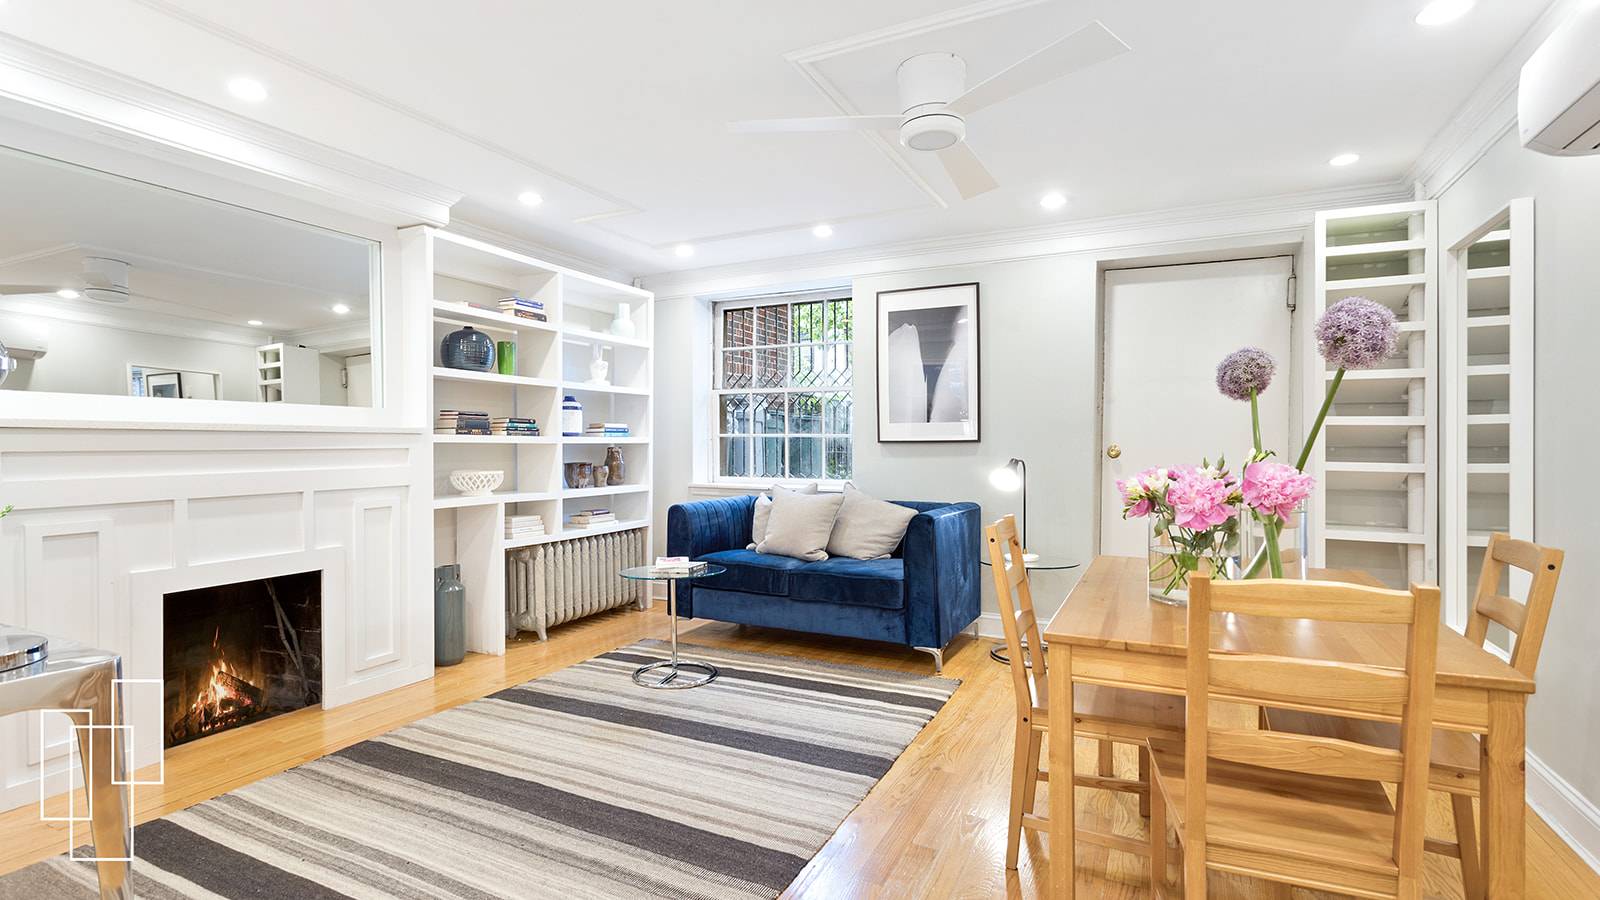 Pre war meets contemporary in this beautiful, bright 2BR floor through co op with private garden.